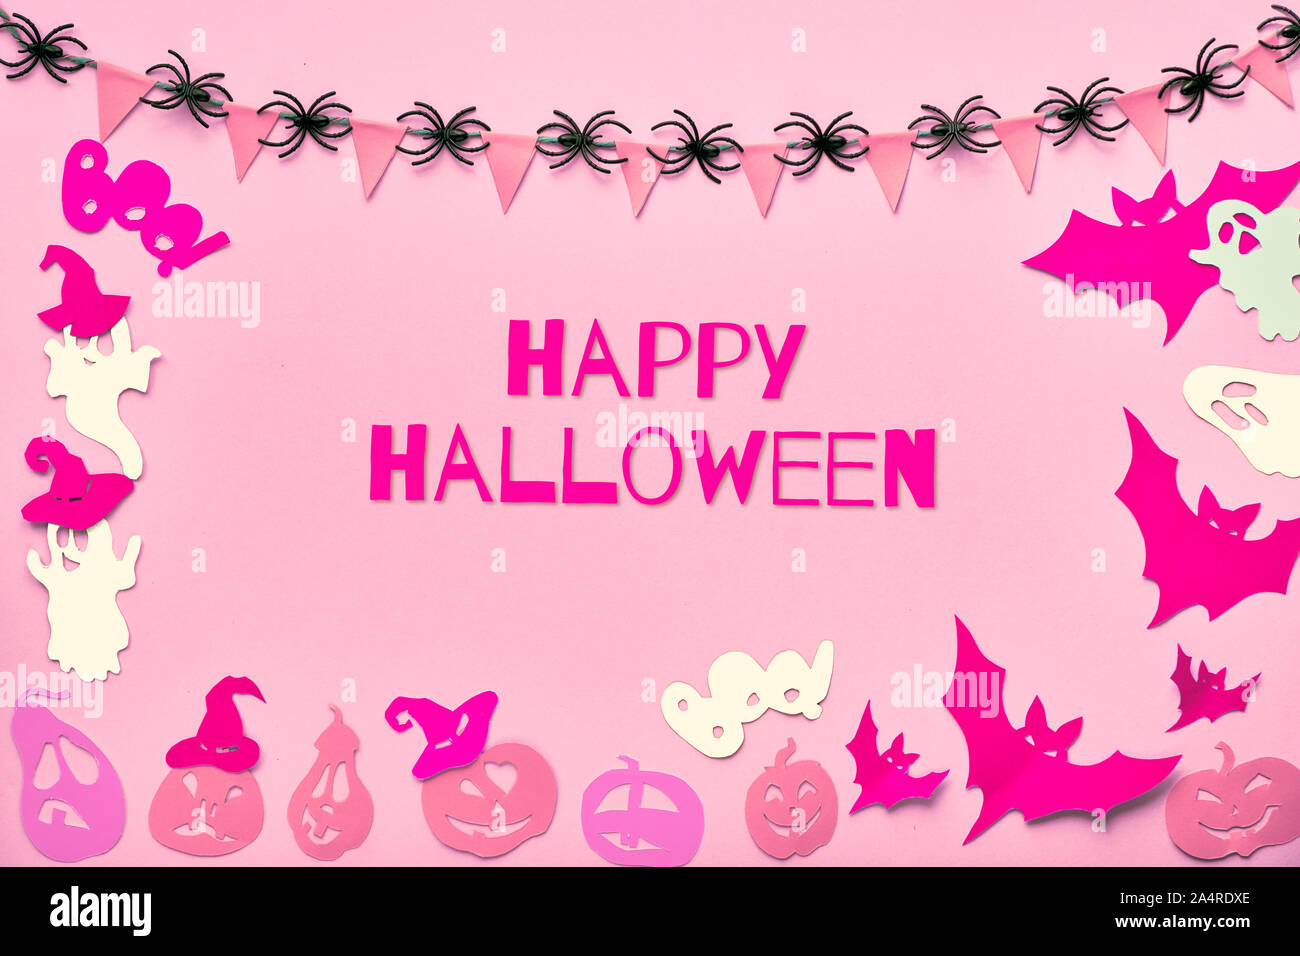 Creative Halloween flat lay background on pink paper with text "Happy  Halloween". Paper cut decorations: bats, ghosts and jack lantern pumpkins,  garla Stock Photo - Alamy